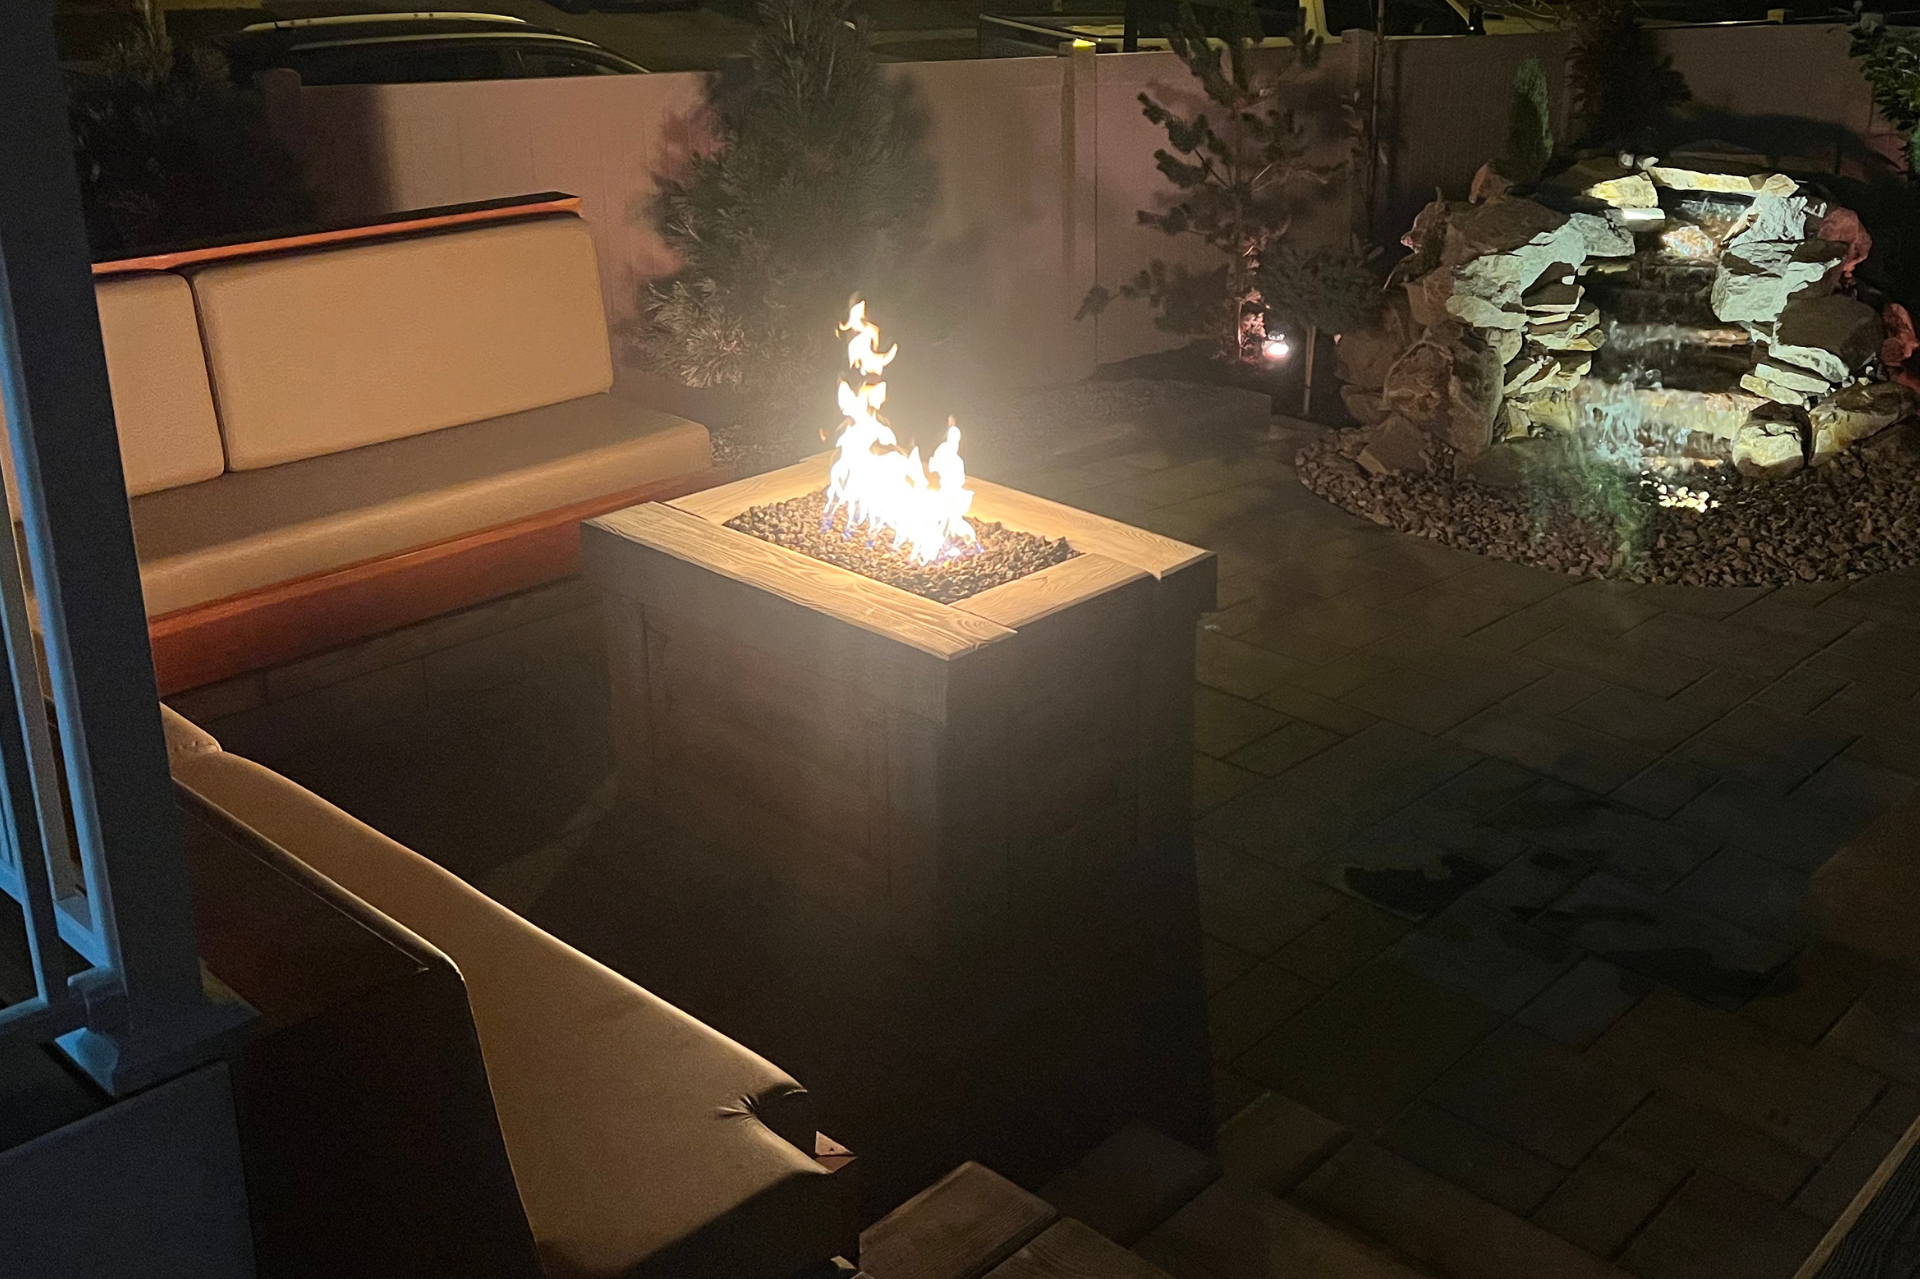 A fire pit is lit up in the middle of a patio at night.